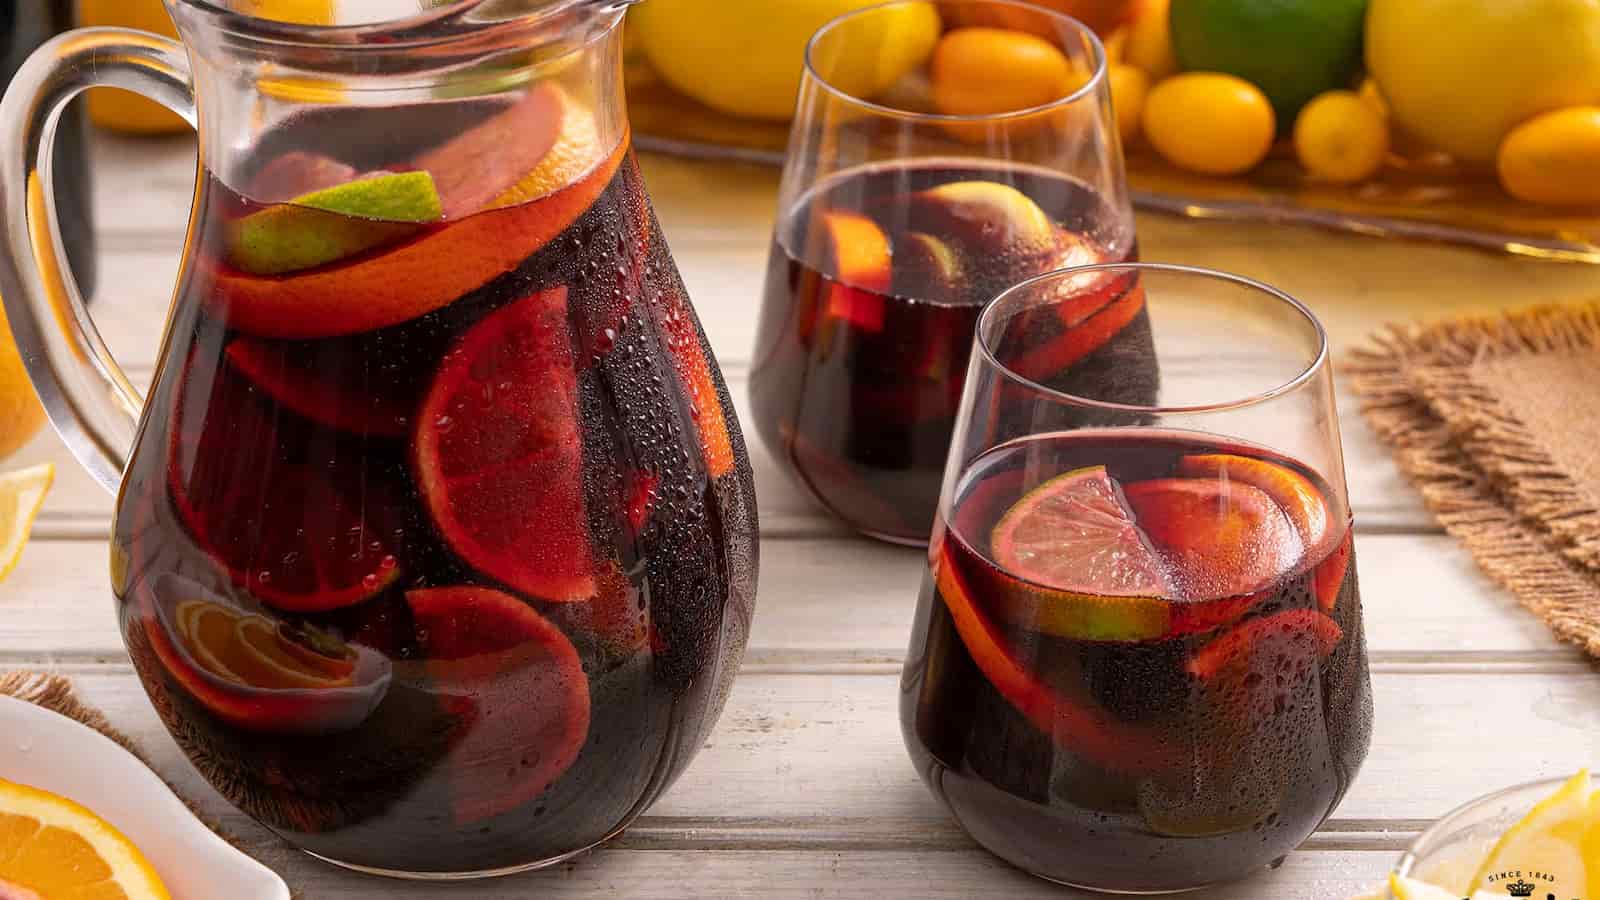 National Sangria Day 2023: Date, History and Why this Day Is So Great